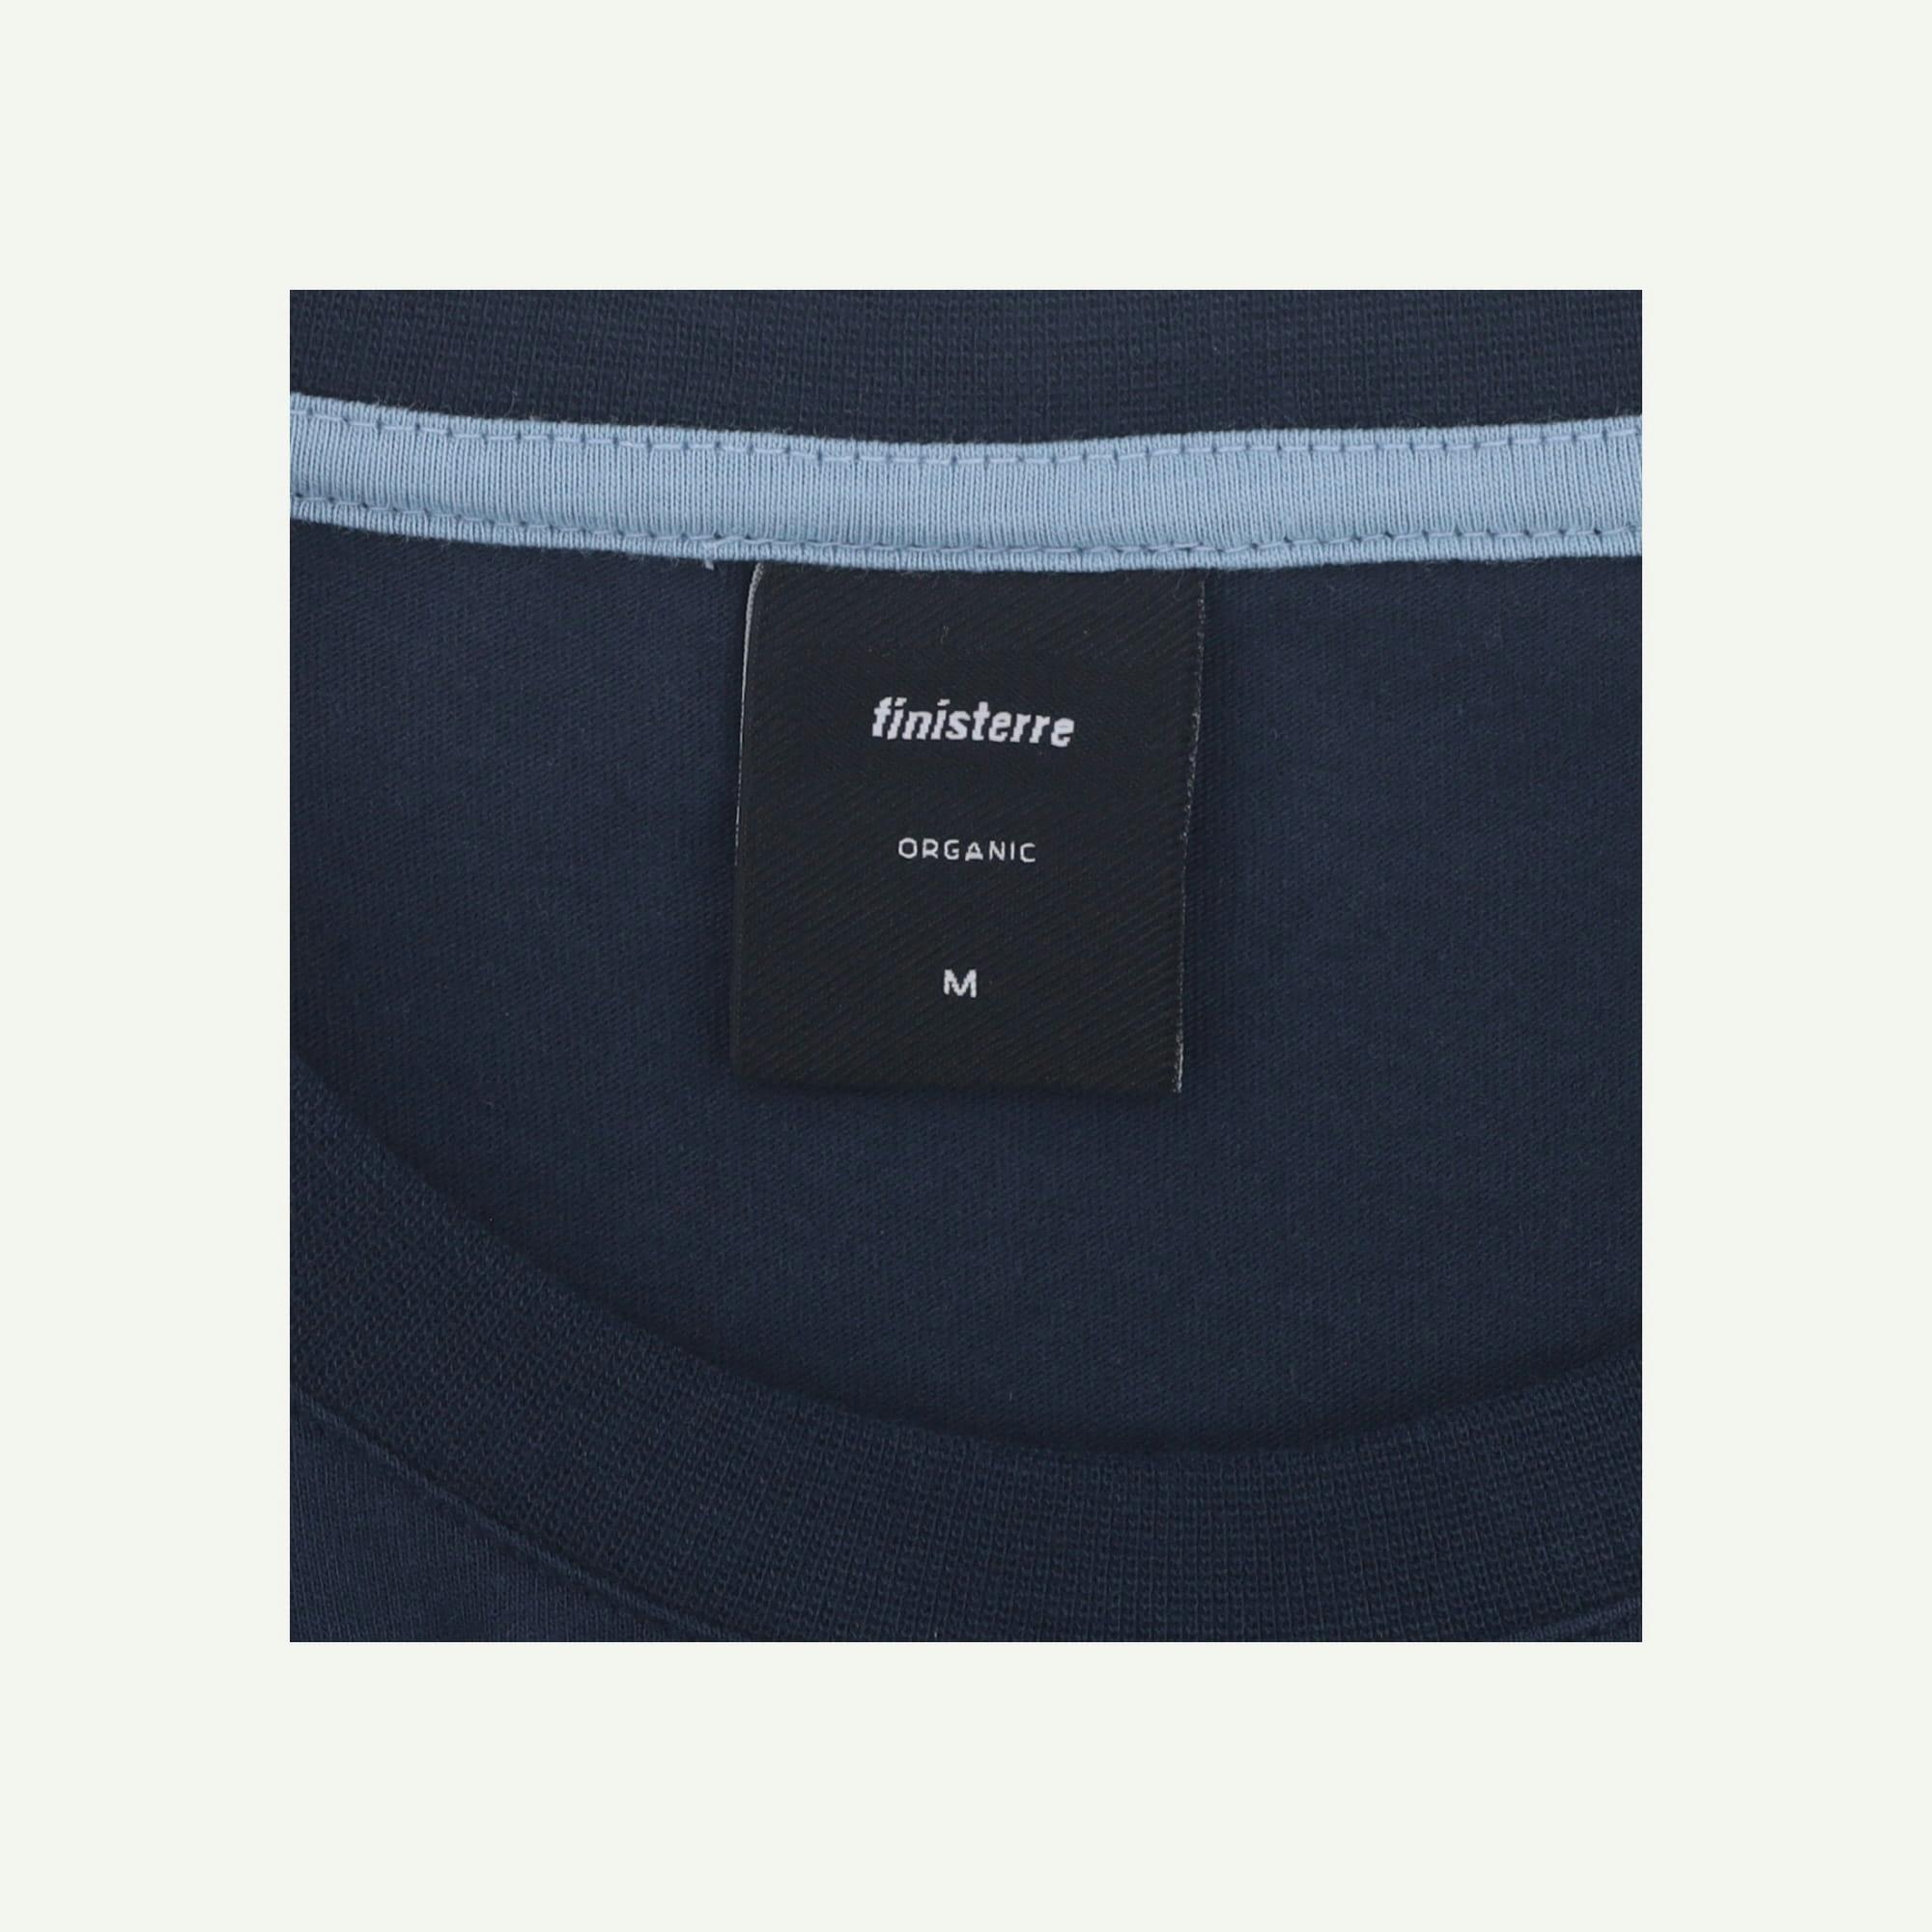 Finisterre As new Navy T-shirt